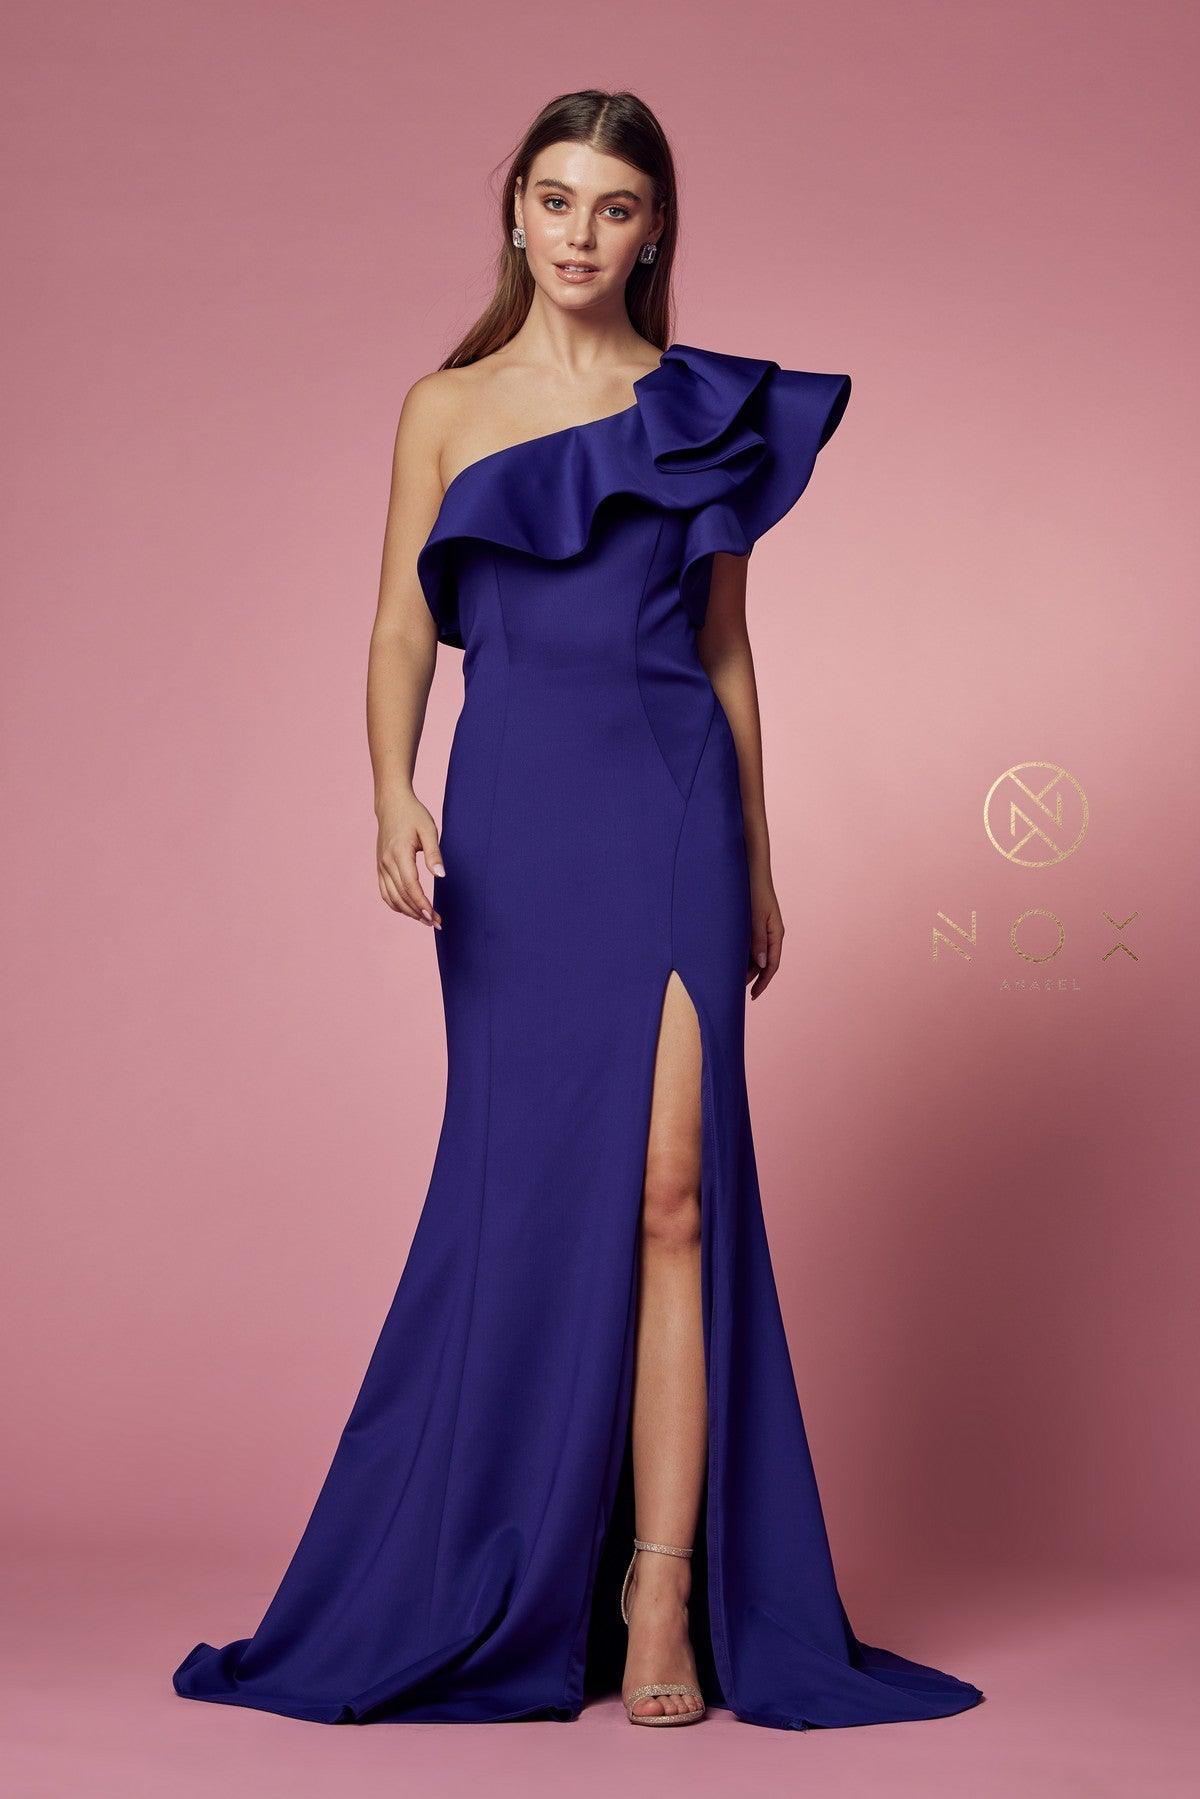 One Shoulder Sexy Long Prom Dress for $225.0 – The Dress Outlet